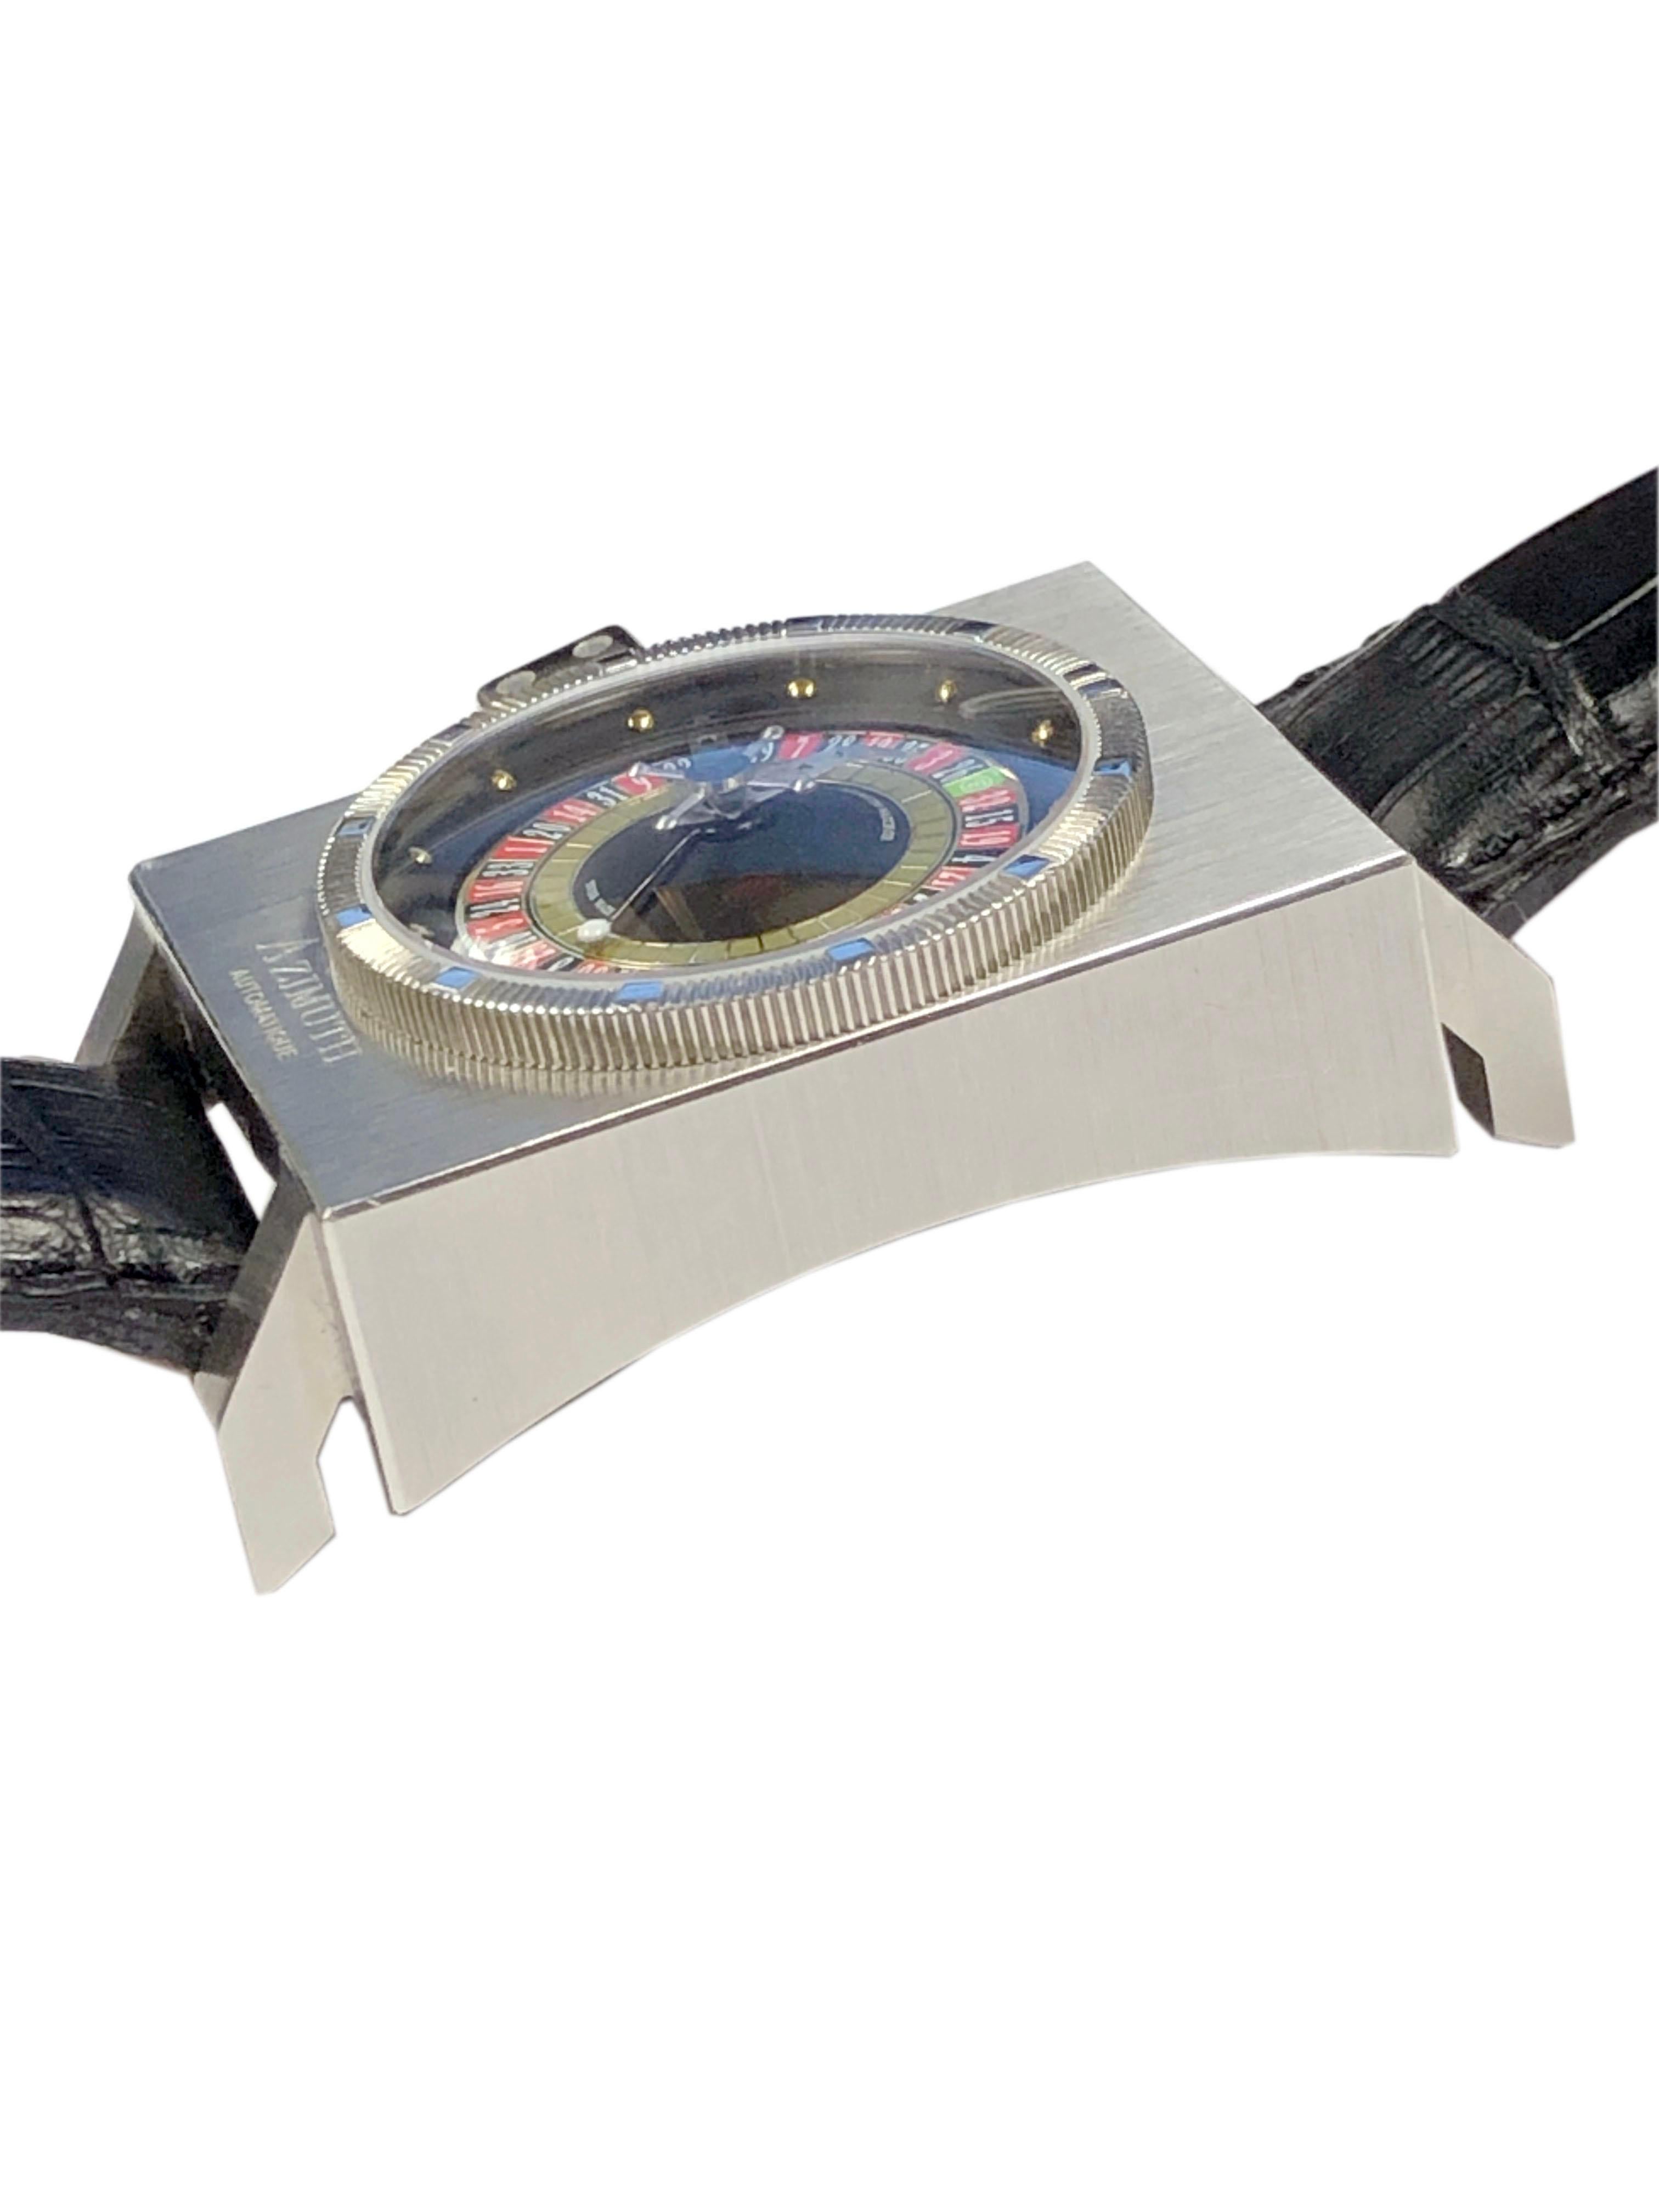 Circa 2010 Azimuth SP 1  King Casino Roulette Wrist Watch, 56 X 35 X 12 M.M Stainless Steel Water resistant case, Automatic, Self Winding movement, Sapphire Glass crystal and unique working Roulette Wheel, spinning center element and unique Dice